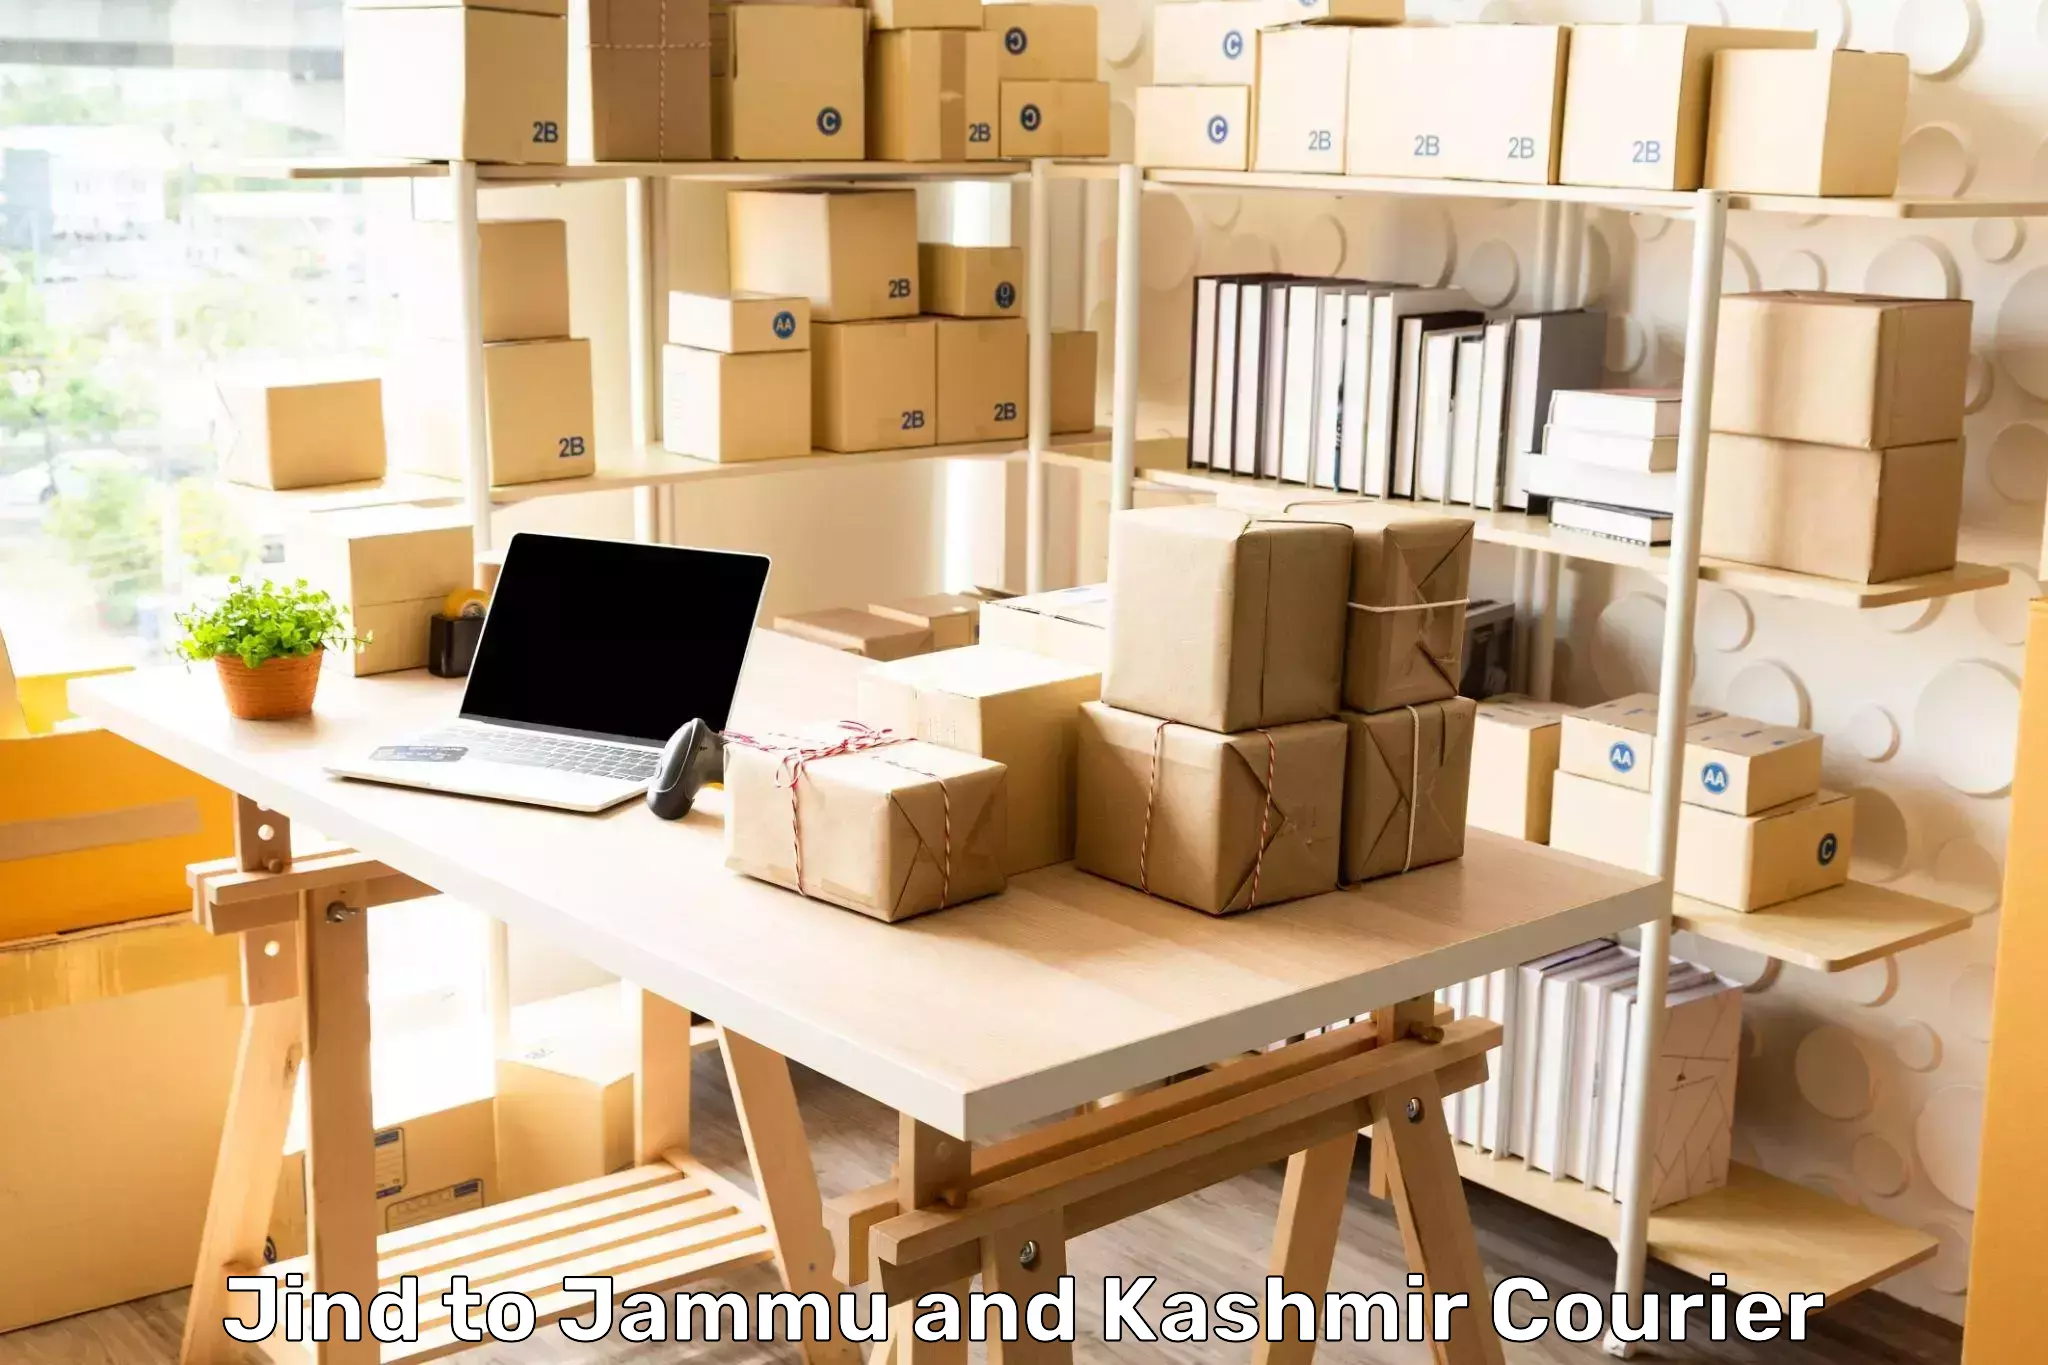 Flexible delivery schedules Jind to Jammu and Kashmir